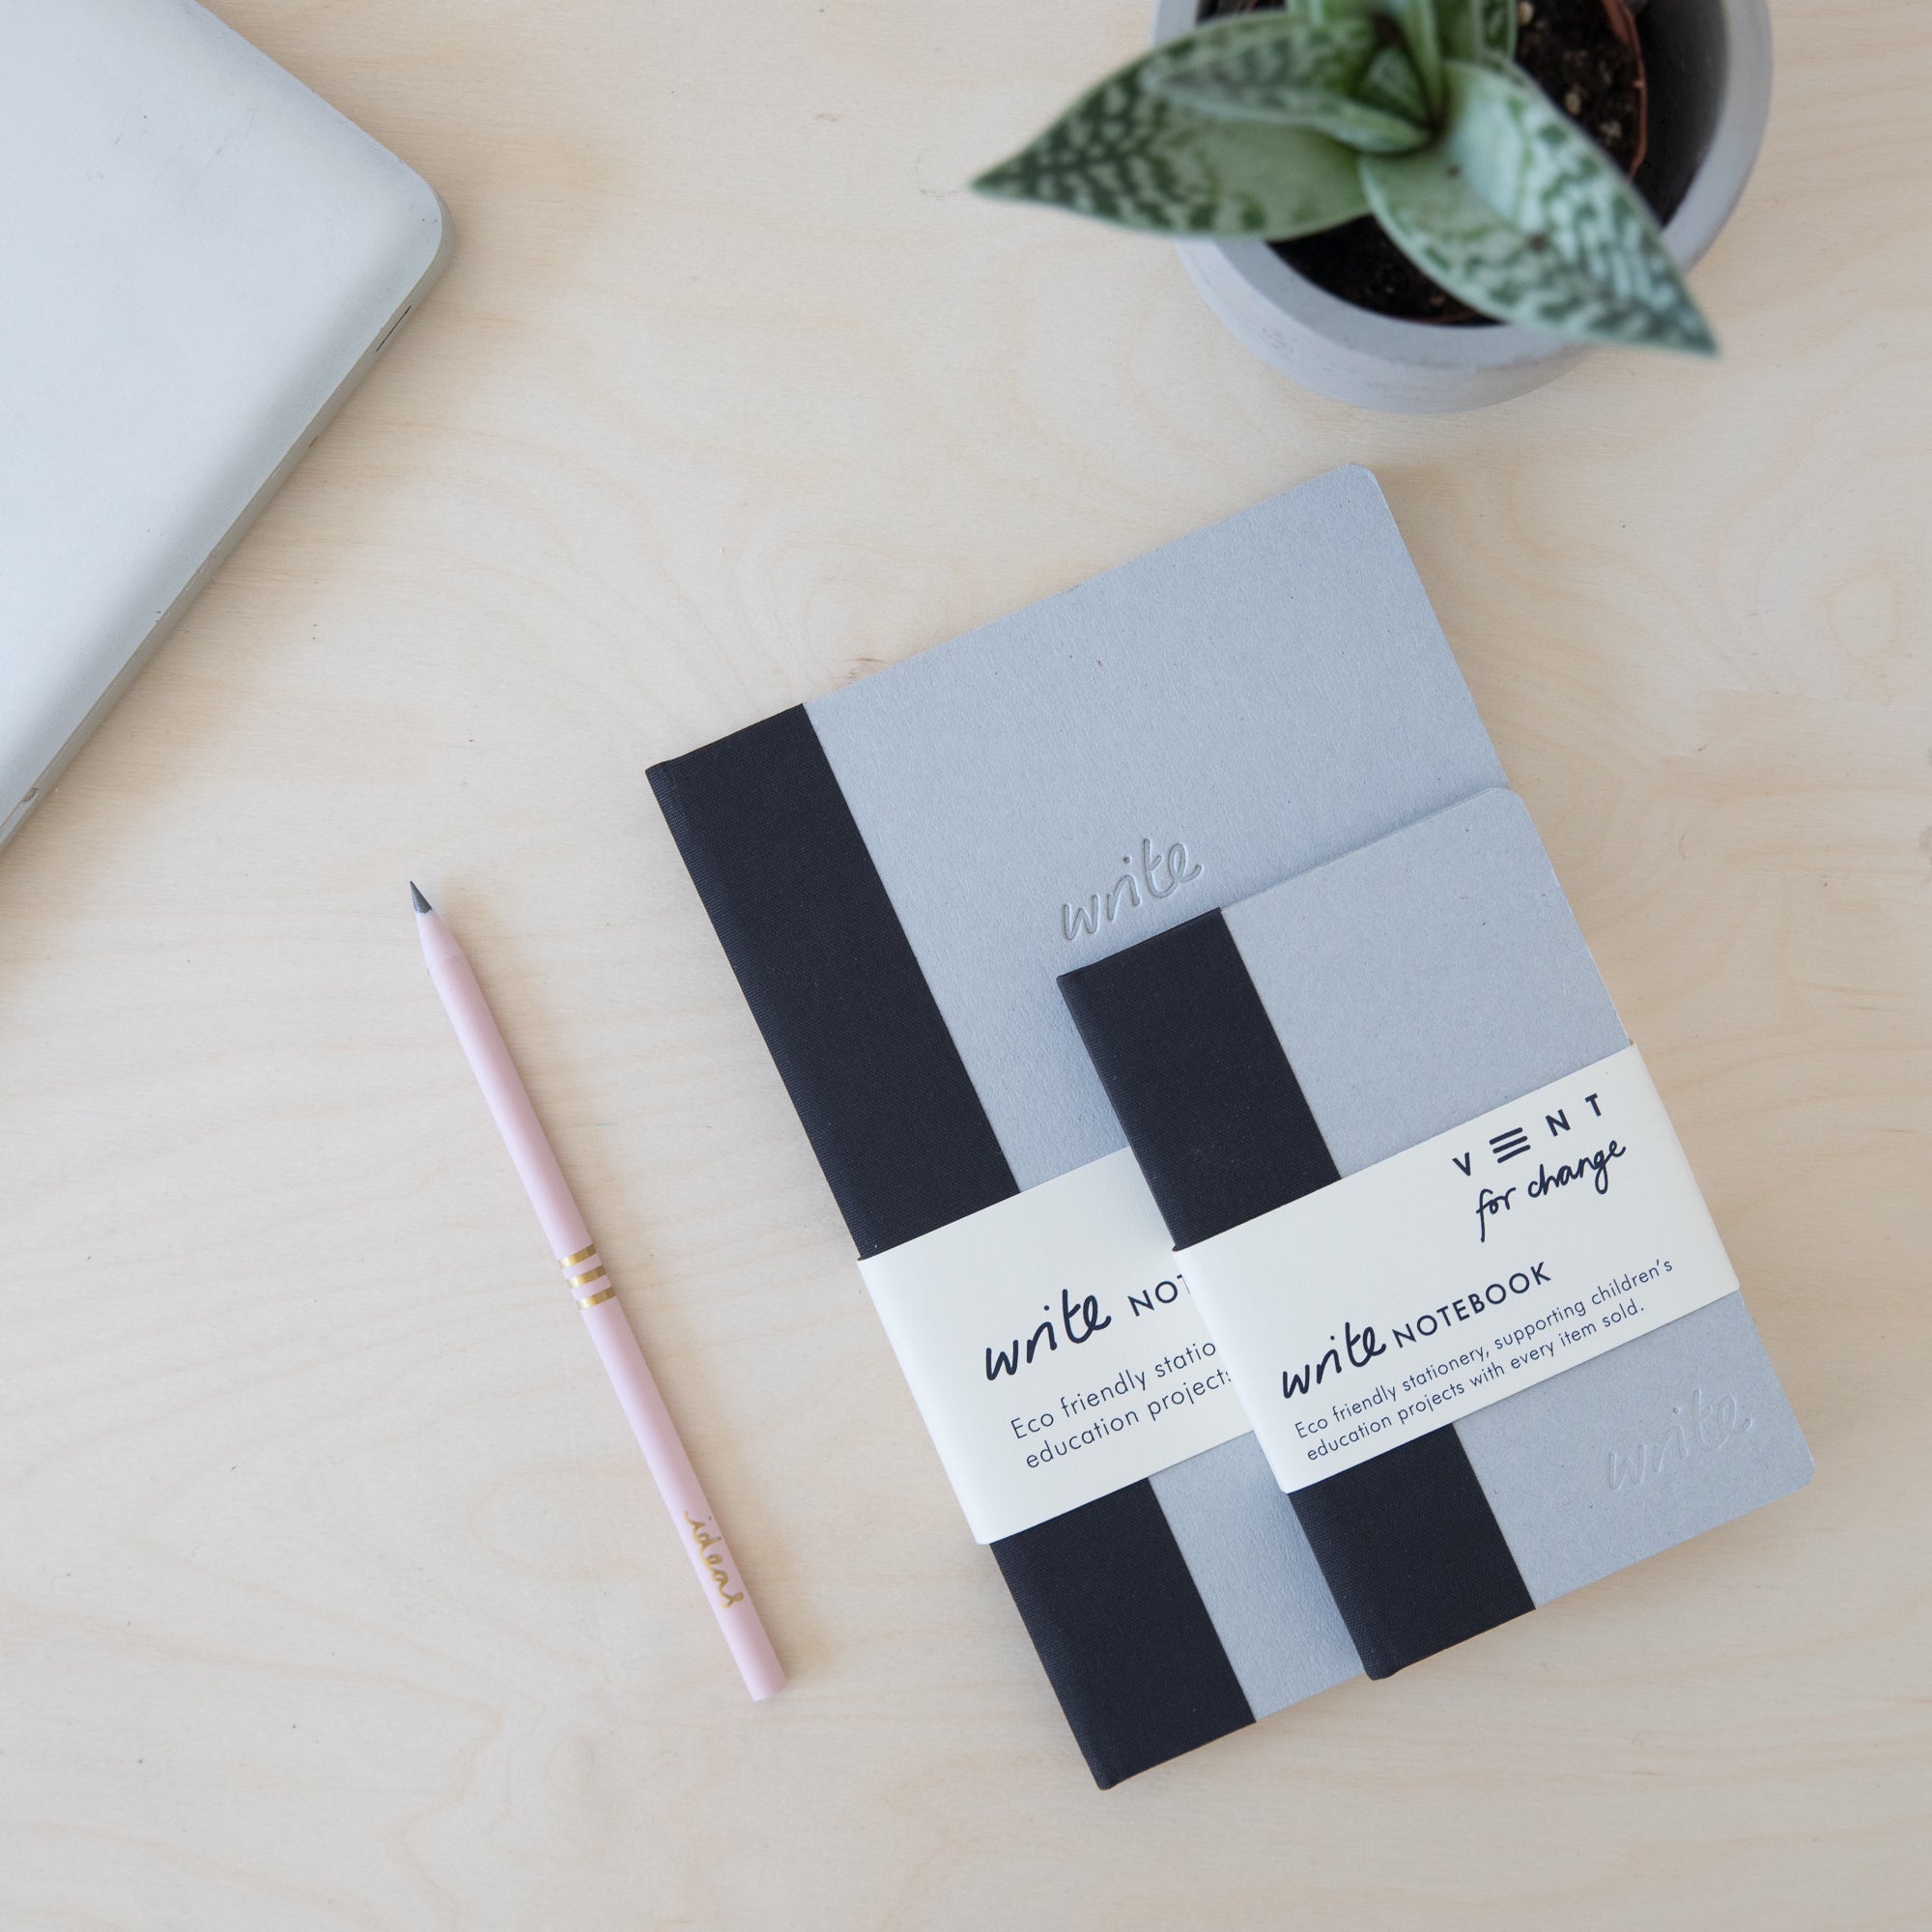 Recycled Hard Cover Mini Notebook - Black Lined